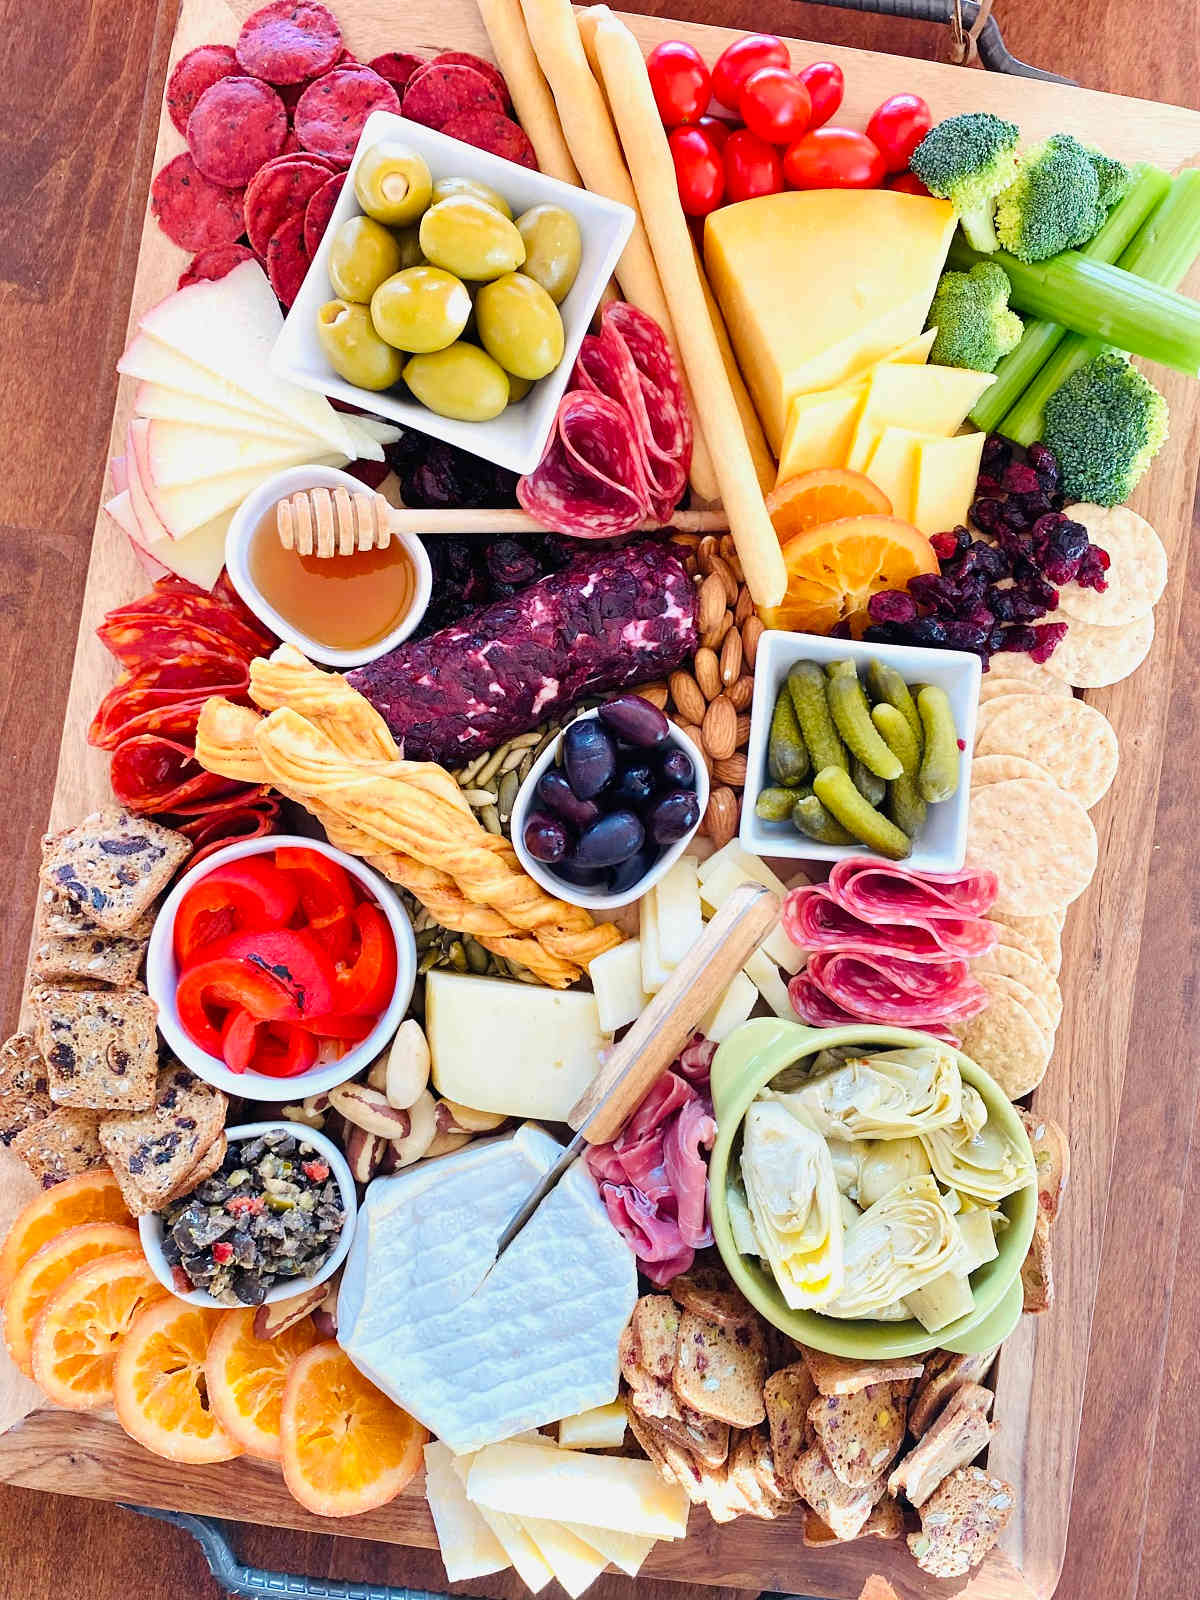 Charcuterie Board Trader Joe’s items with honey pickles red peppers vegetables nuts fruits cheese meat and dips and spreads